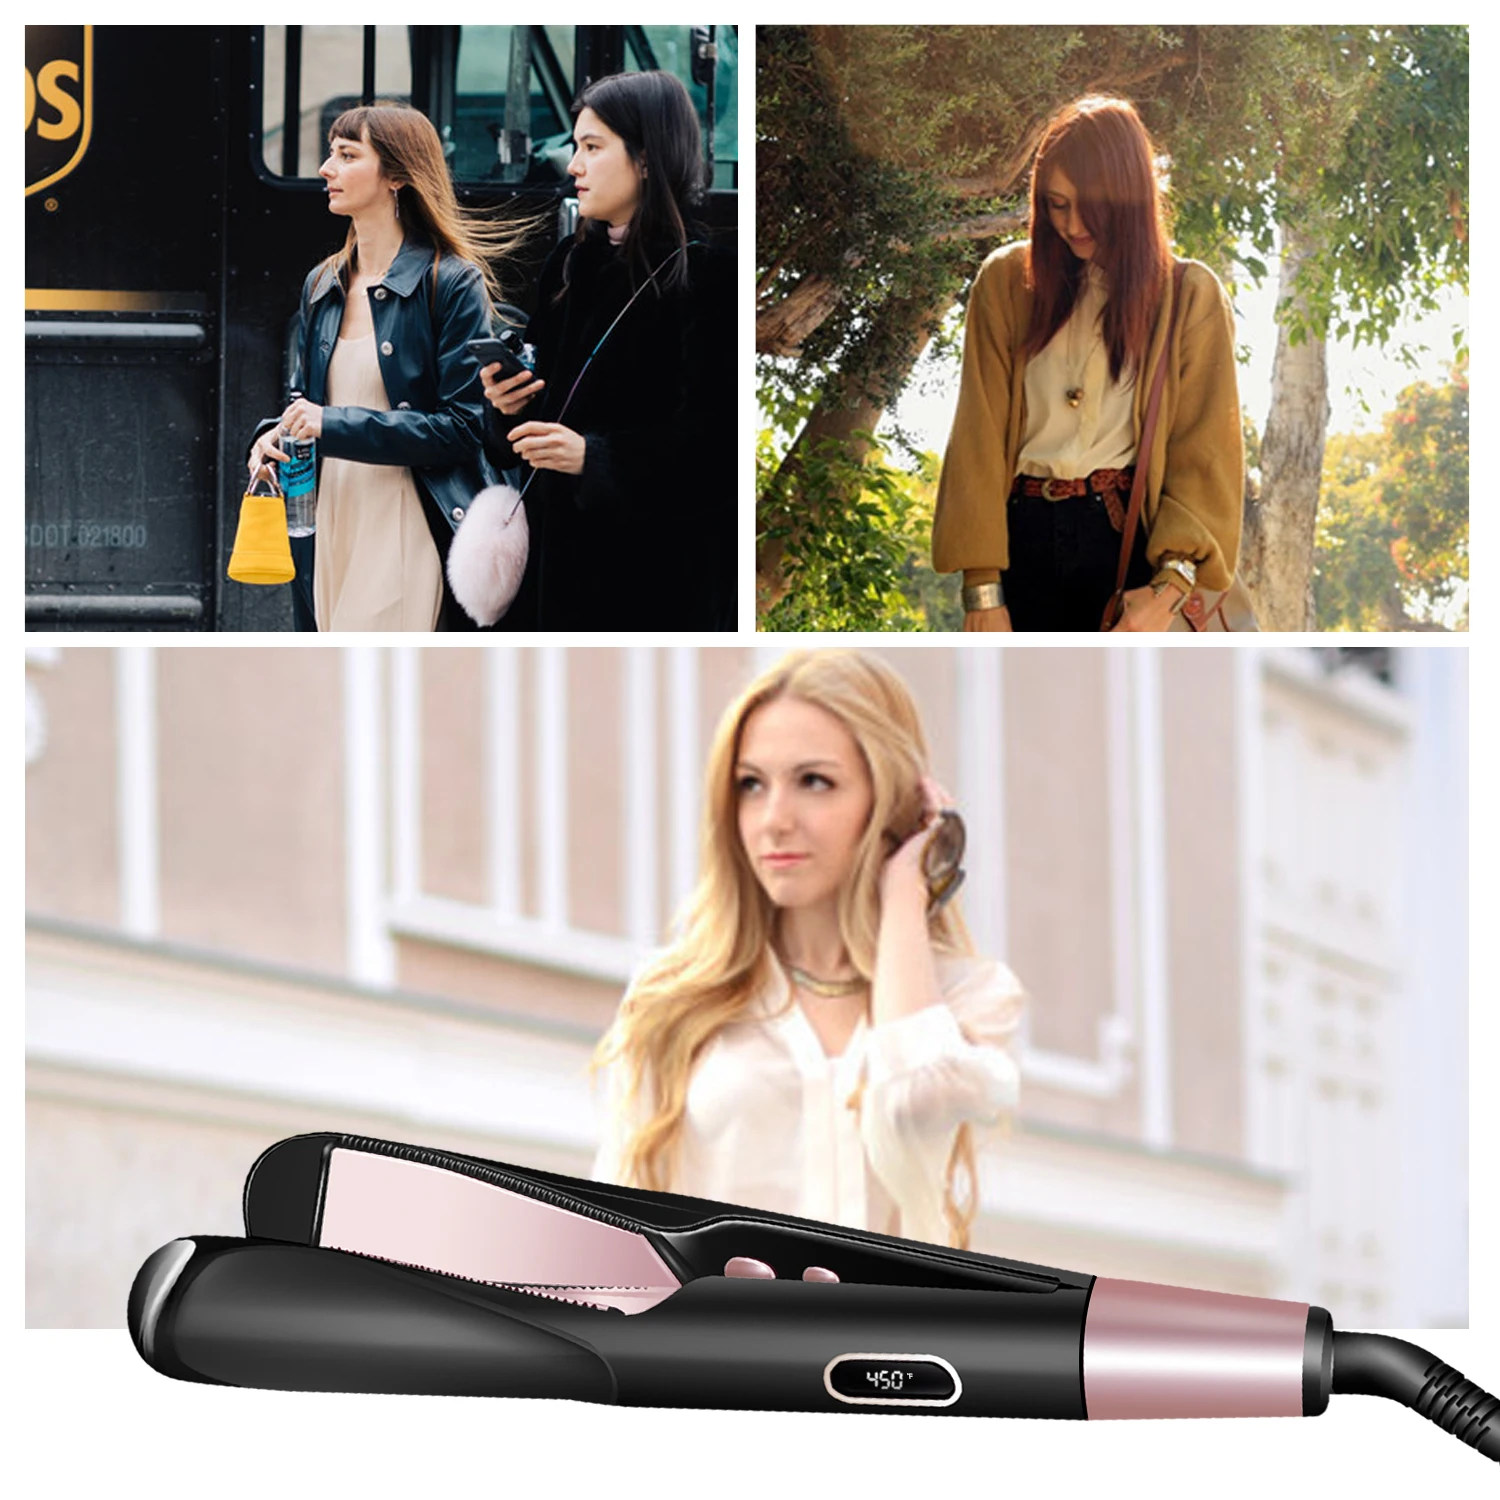 

2 In 1 Straightening&Curling Wavy Hair Ceramic Coated Plate Iron Hairstyle Tool Professional Twisted Flat Iron Hair Straightener